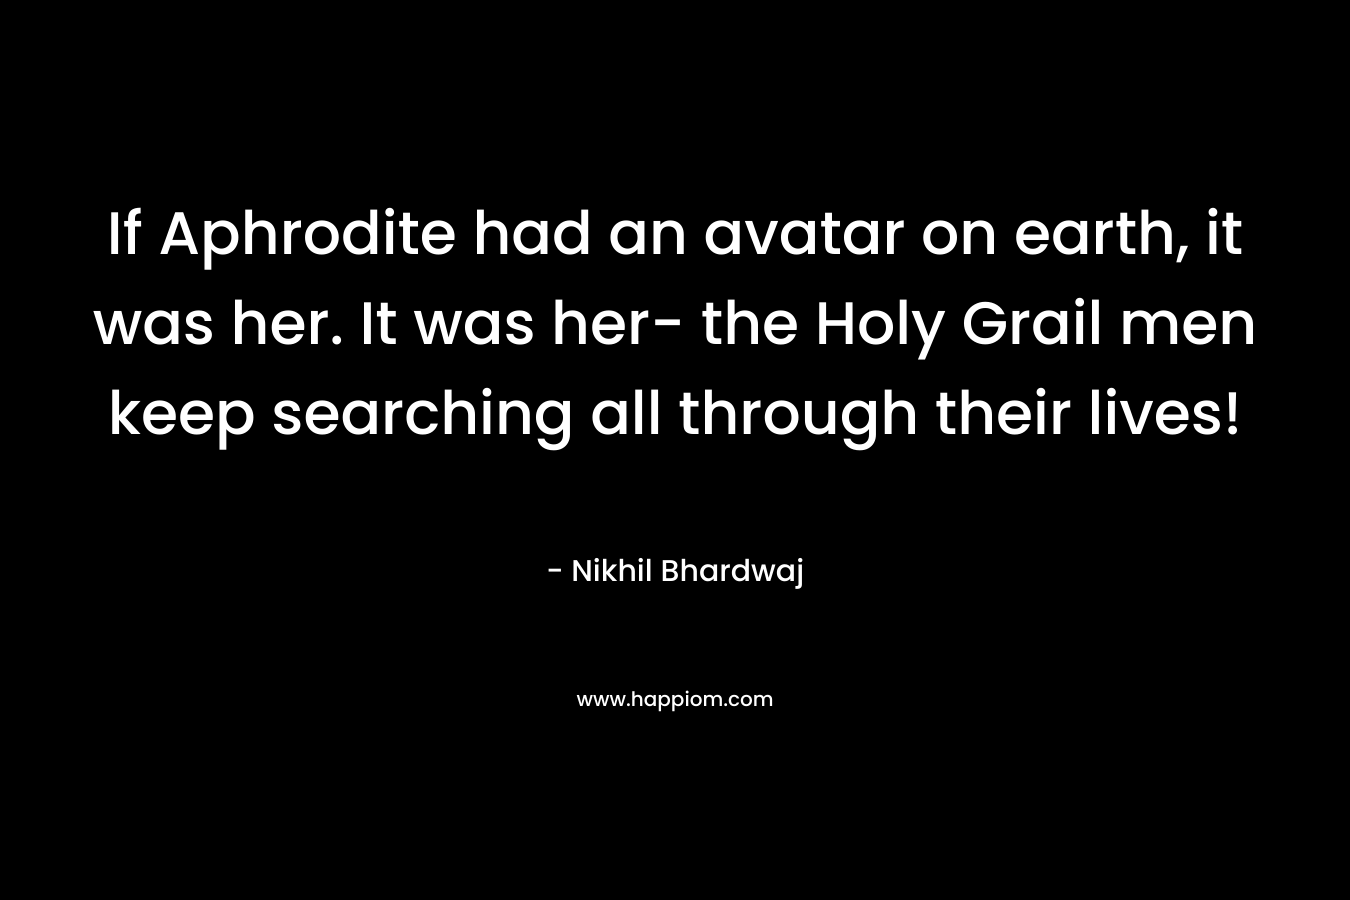 If Aphrodite had an avatar on earth, it was her. It was her- the Holy Grail men keep searching all through their lives!